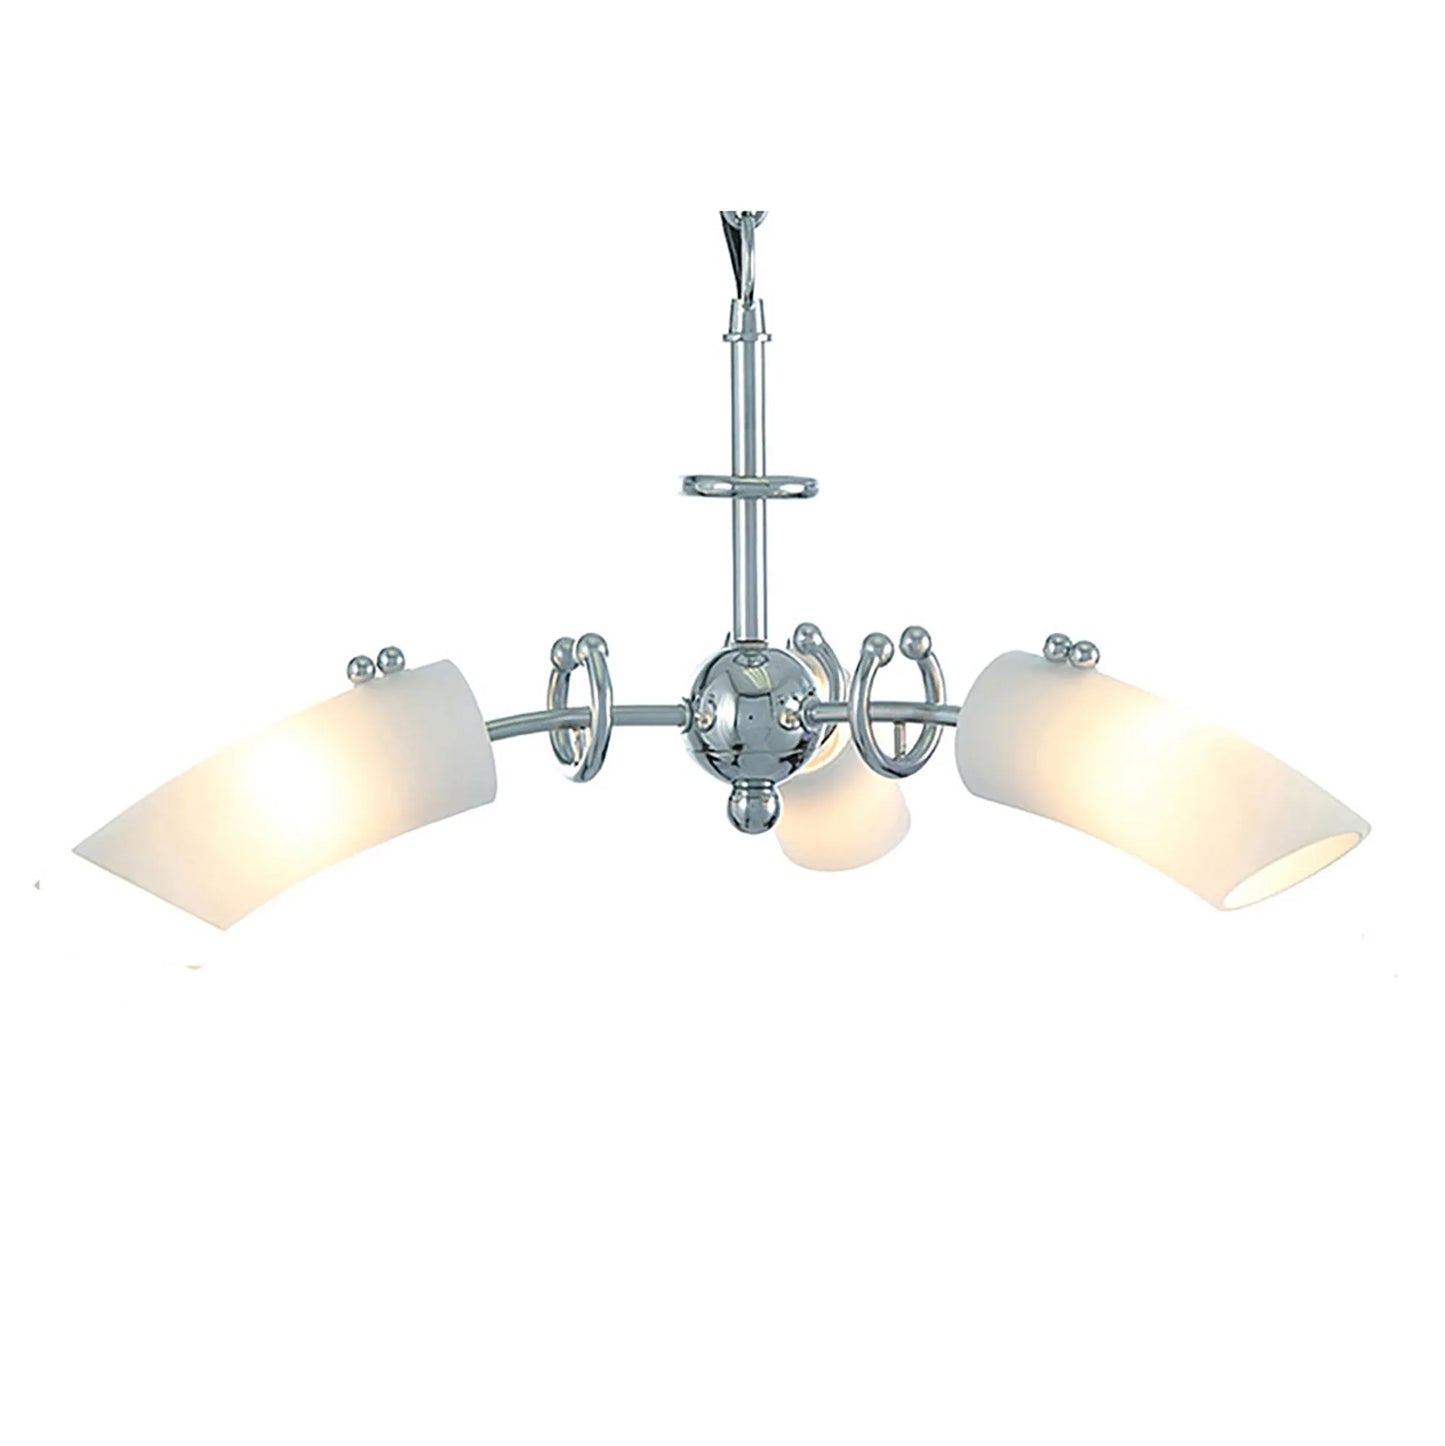 Lucia Pendant 3 Light G9 Polished Chrome/Frosted Glass  (Diyas IL20231)